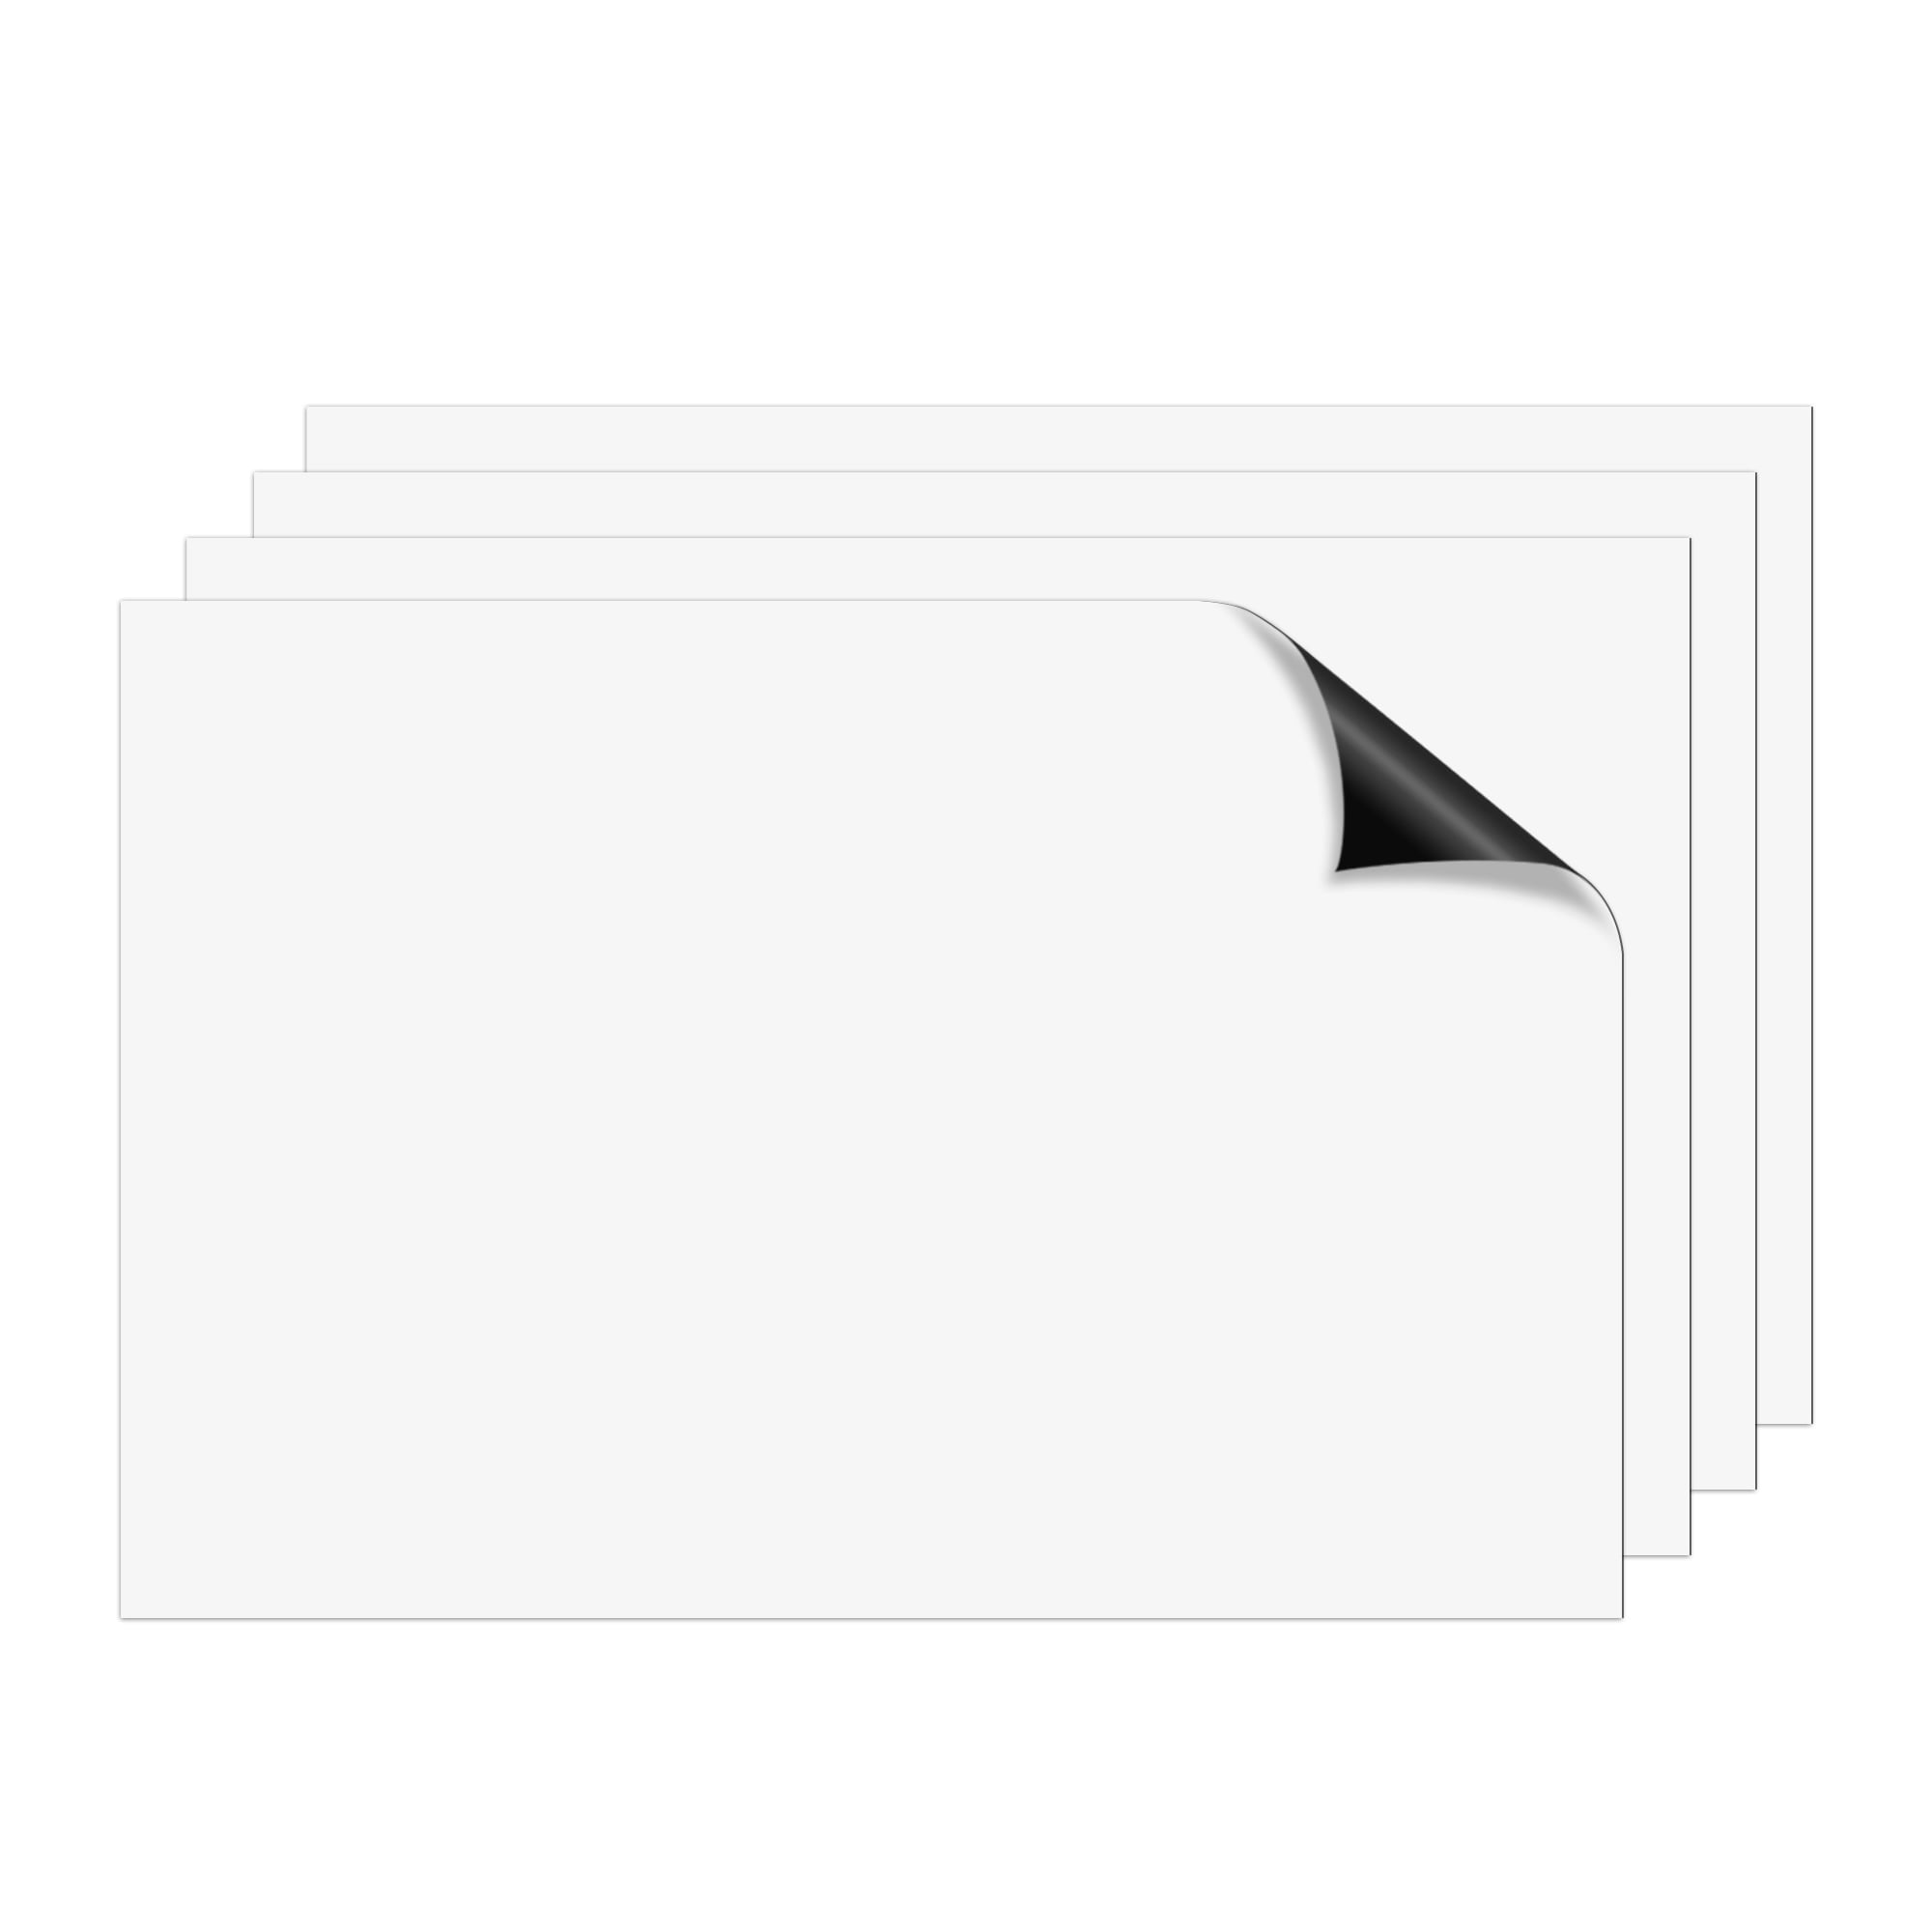  Marietta Magnetics - Laser Printable 8.5 x 11 Magnetic Paper,  10 (ten) mil -10pk : Office Products